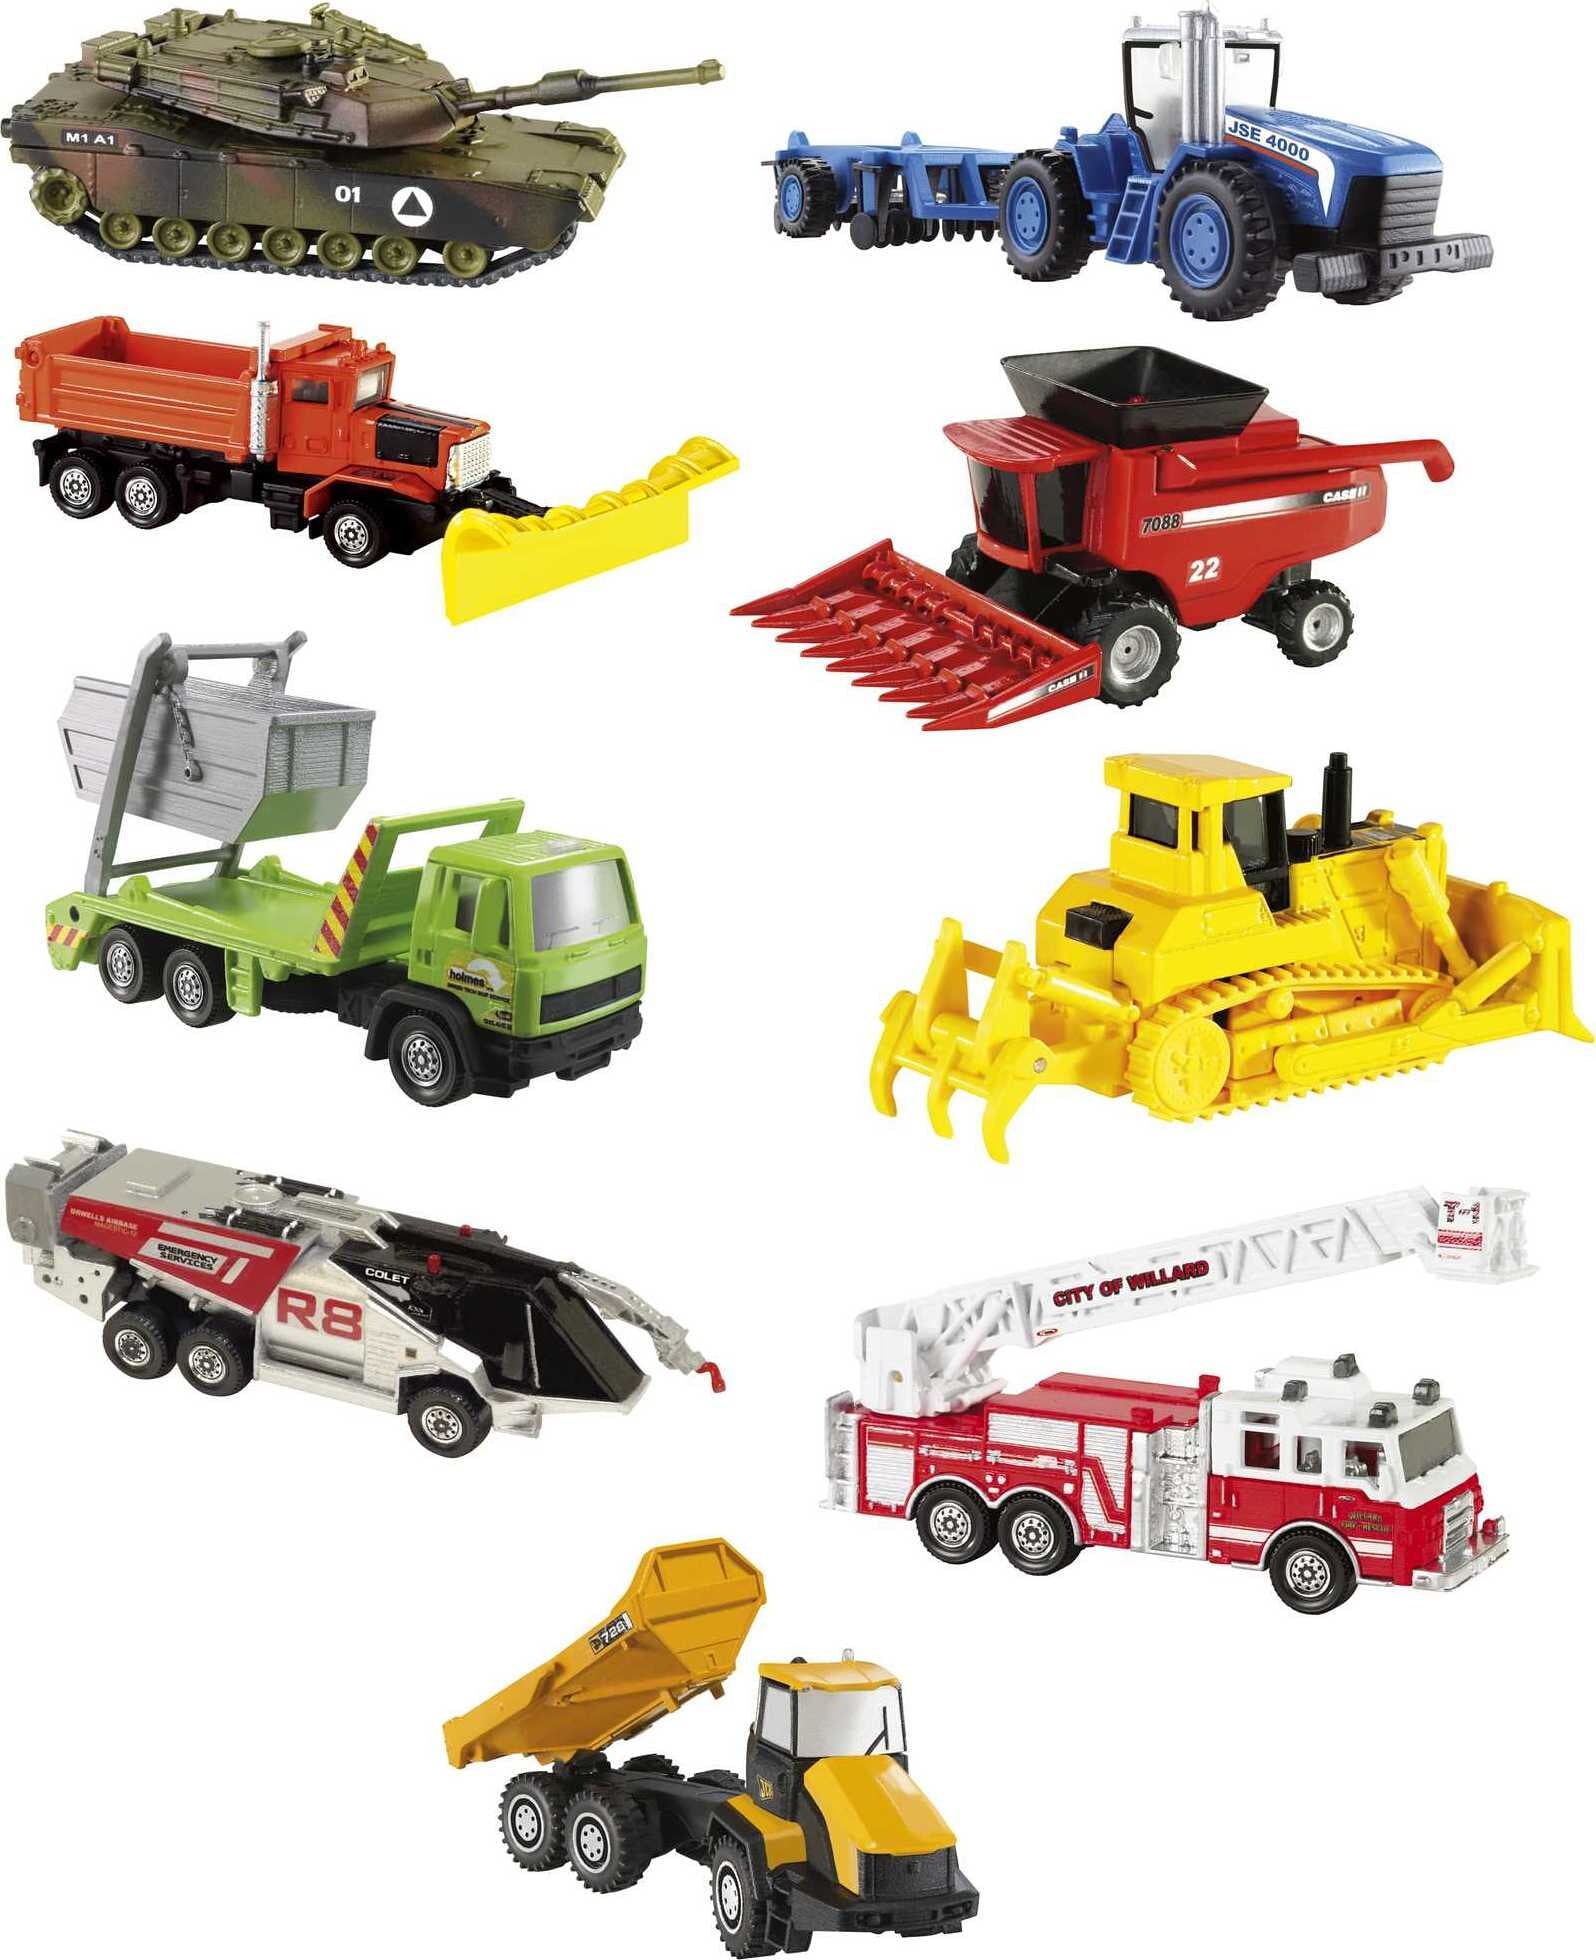 Matchbox Working Rigs Toy Truck in 1:64 Scale With Moving Part (Styles May Vary)